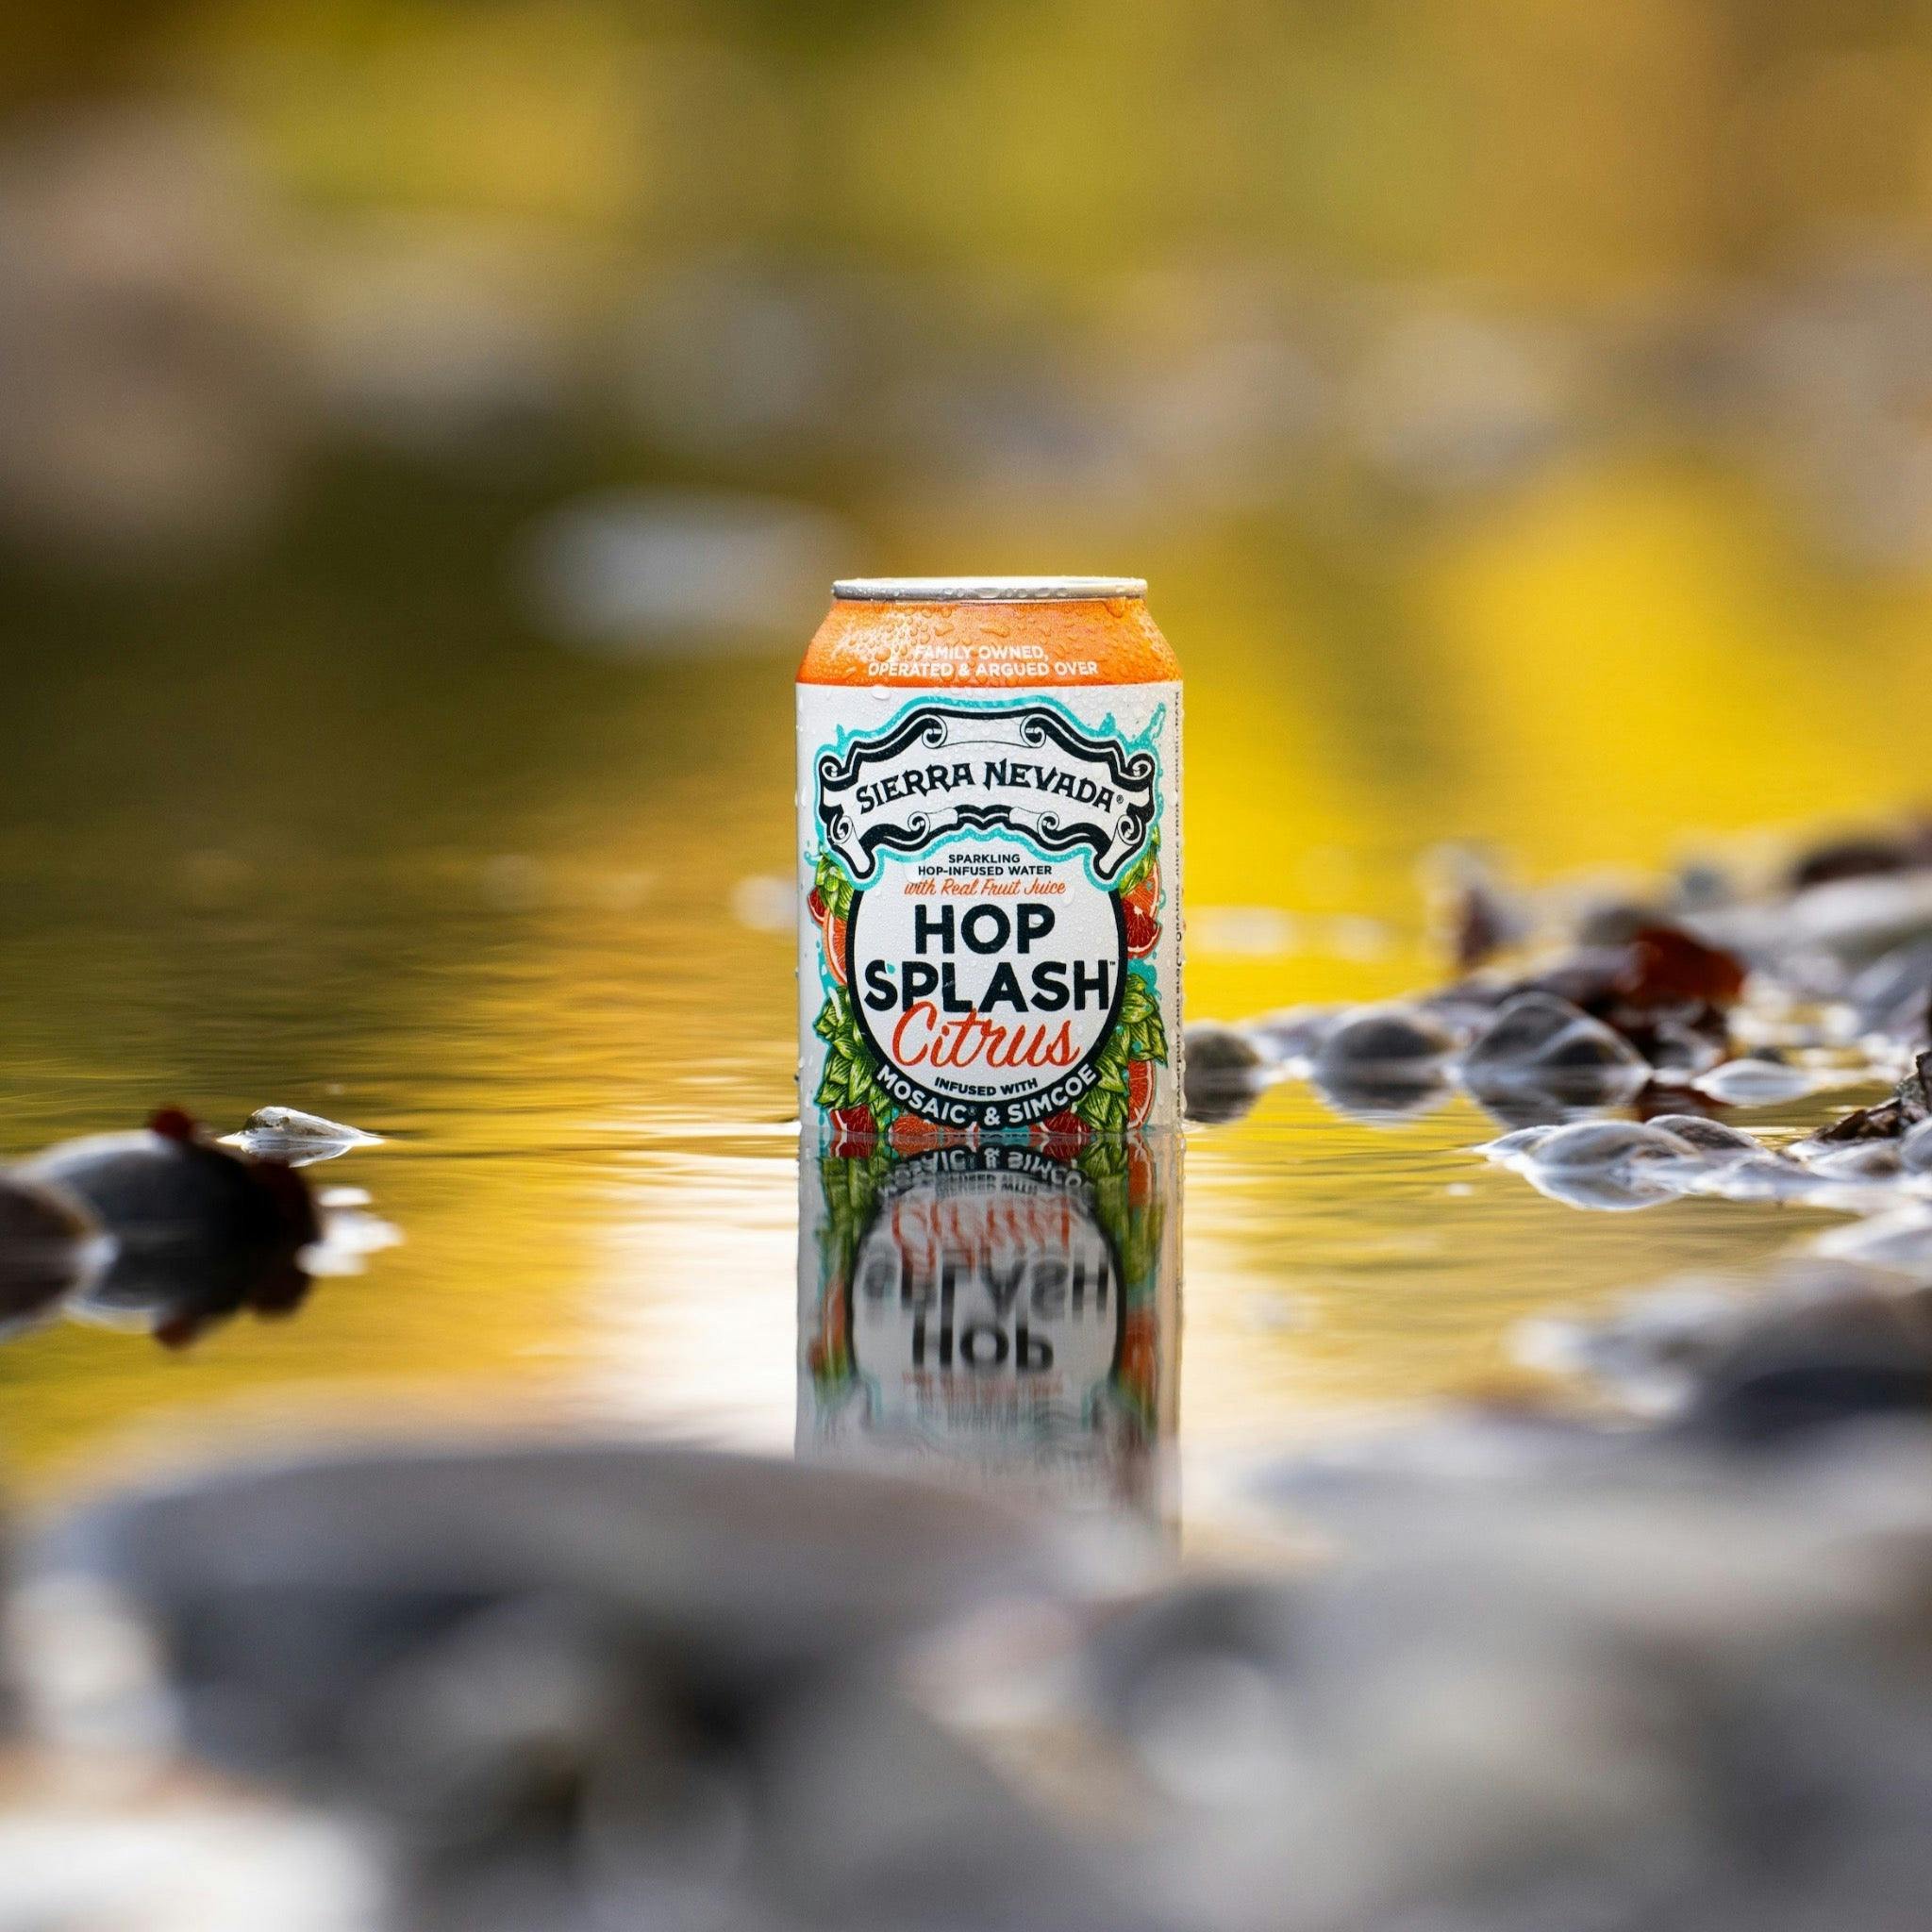 Sierra Nevada Brewing Co. Hop Splash Citrus Non-Alcoholic Sparkling Hop Water - A cold can of Hop Splash Citrus sitting in a shallow pool of water surrounded by river rocks